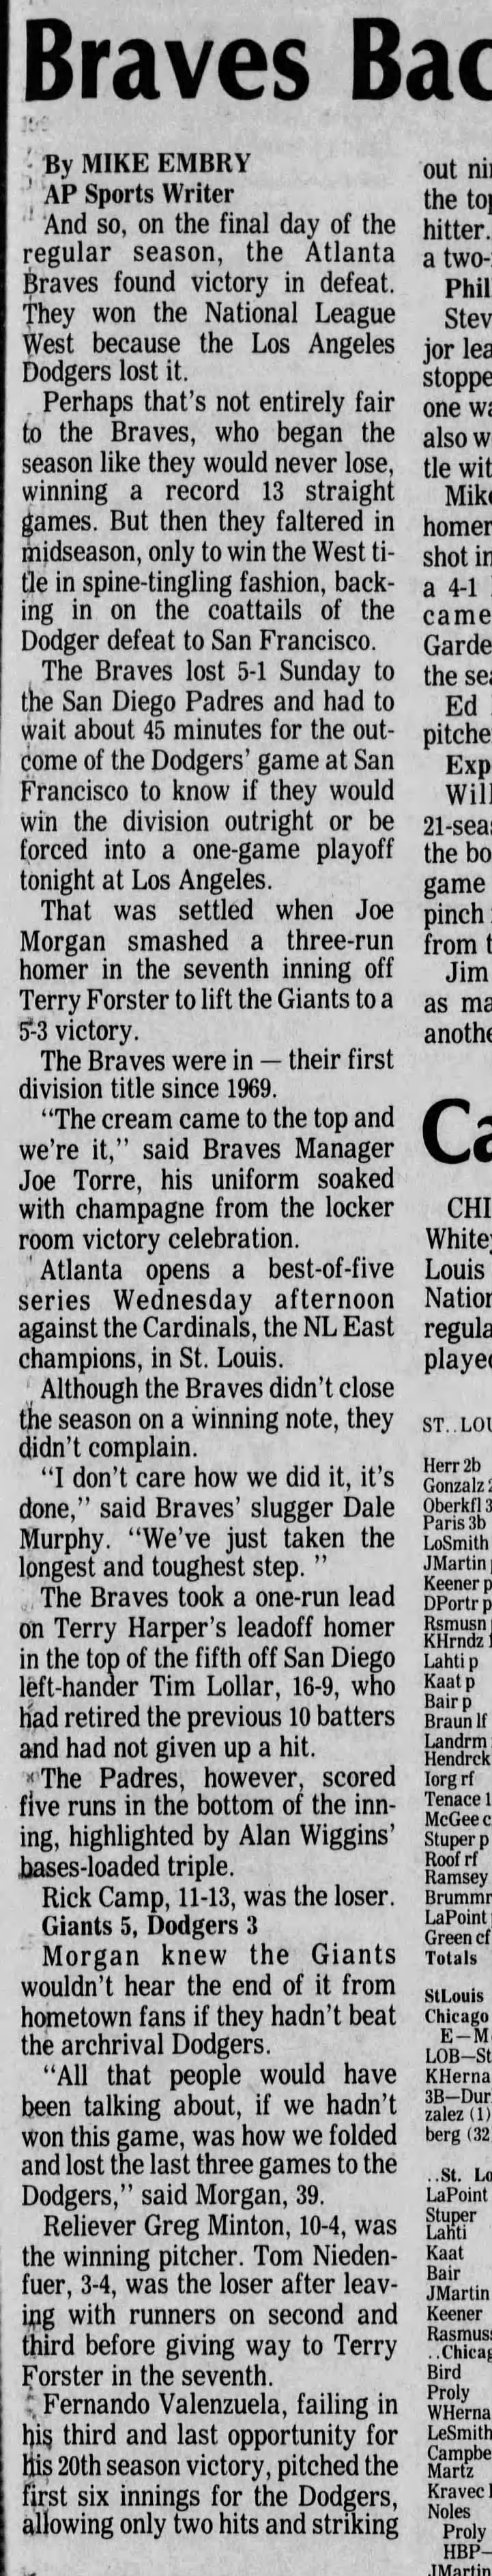 Braves win NL West in 1982